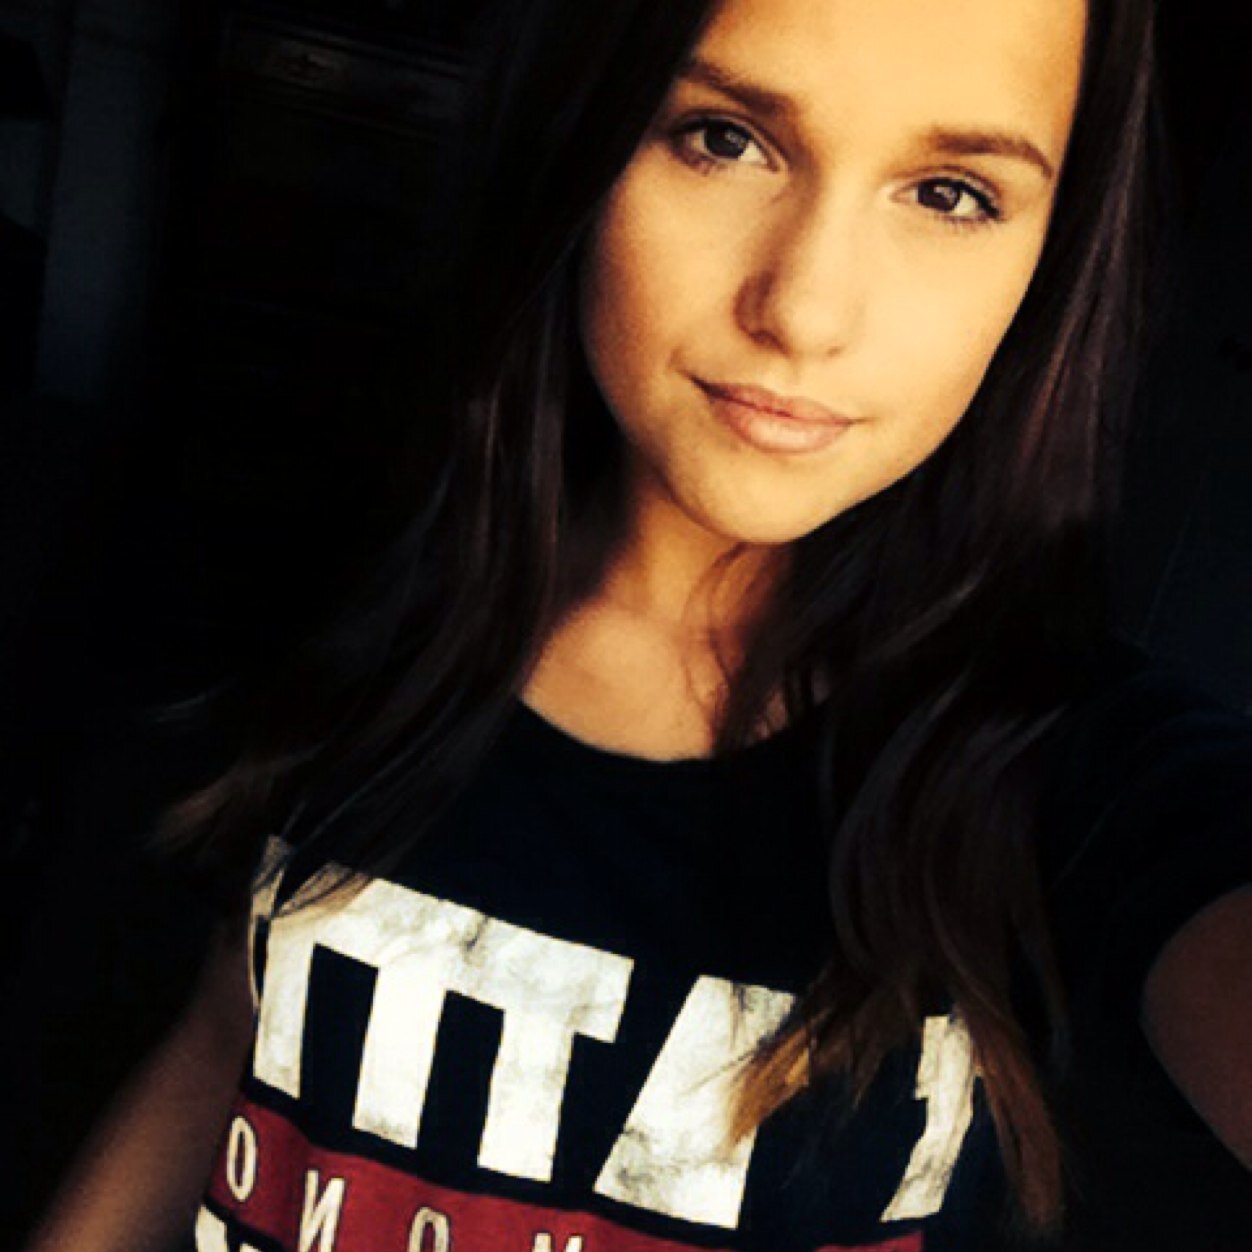 14 years old girl from sweden , love to sing 

Justin bieber, Ariana Grande, Ian Somerhalden, Nina Dobrev, Paul Wesly, Cody Chistian